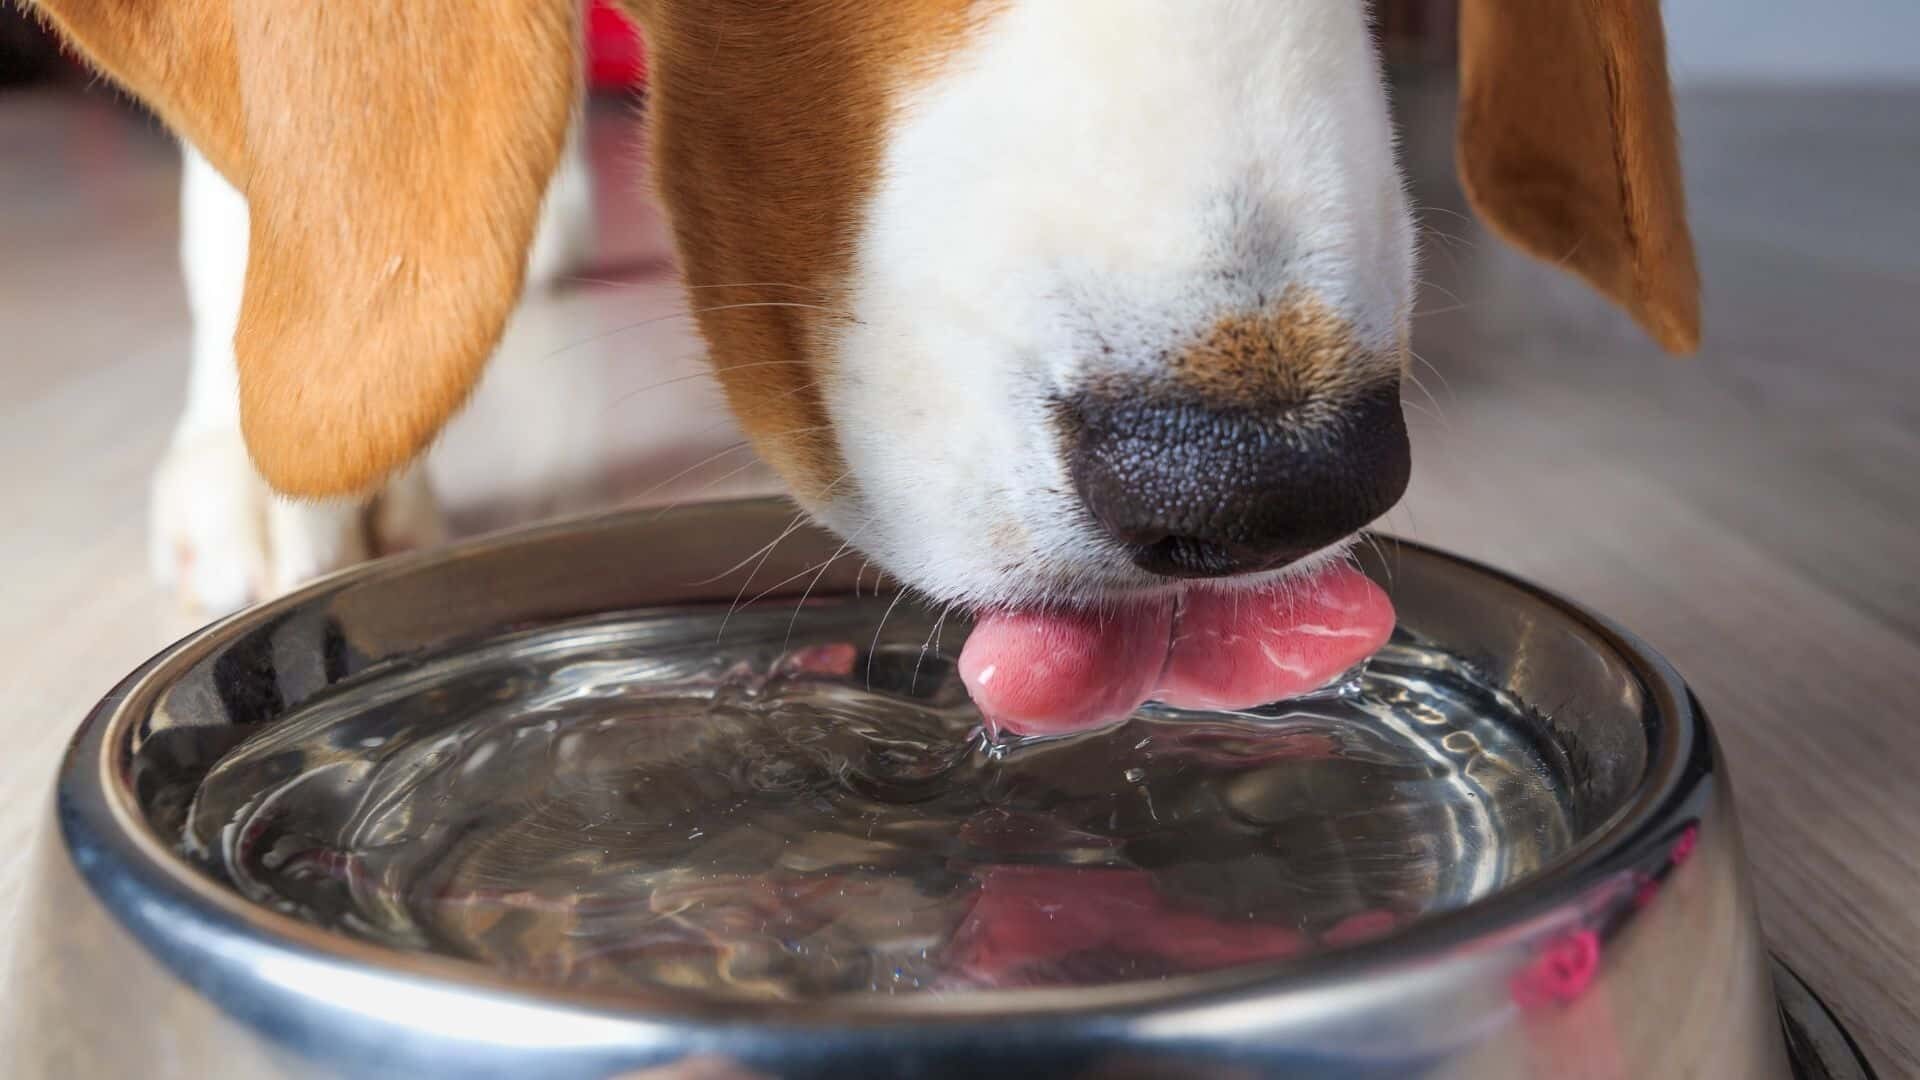 Pros and cons of putting water in dog’s kibble